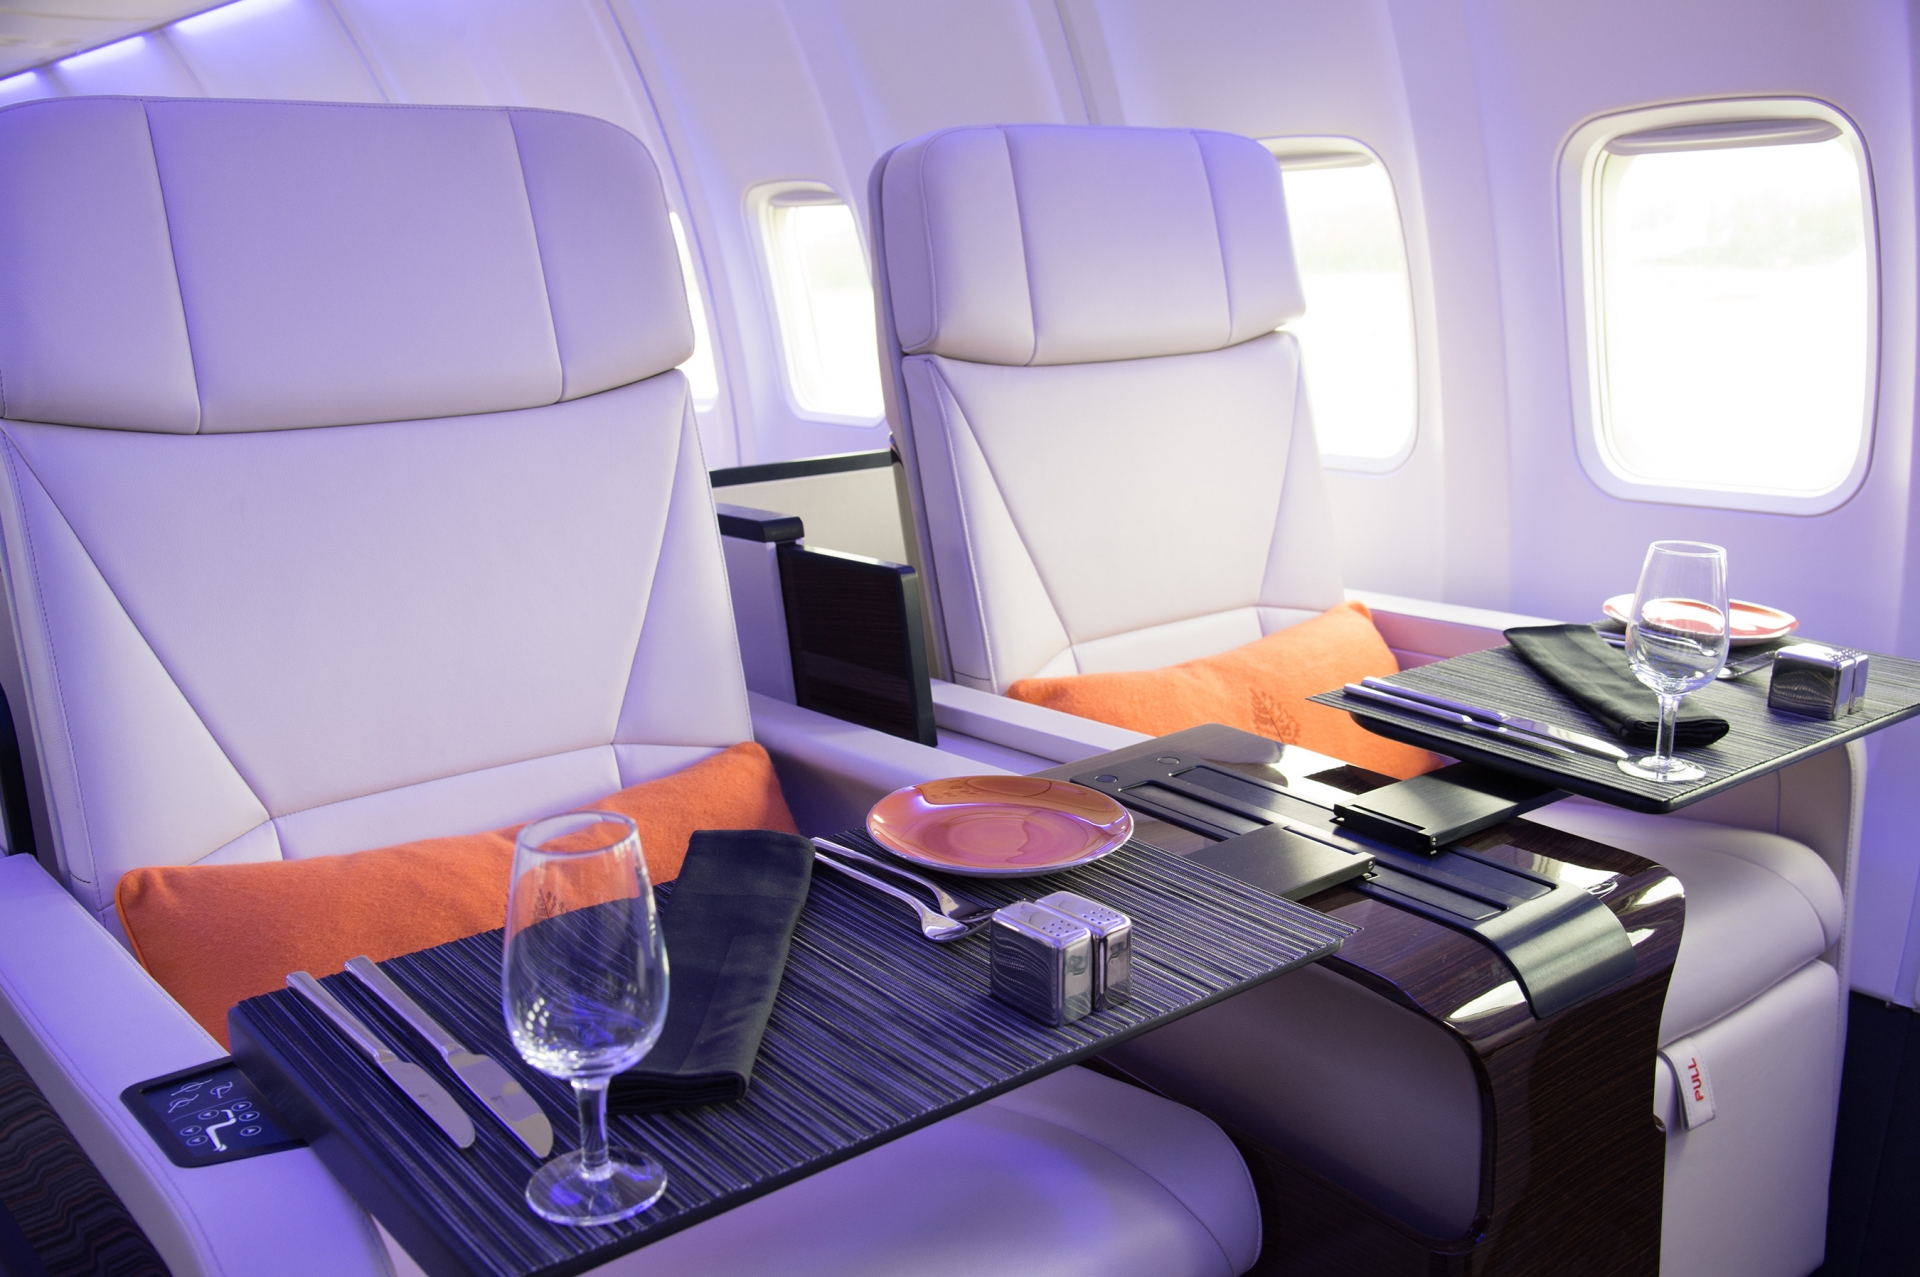 This luxury jet will get your trip started on the right foot